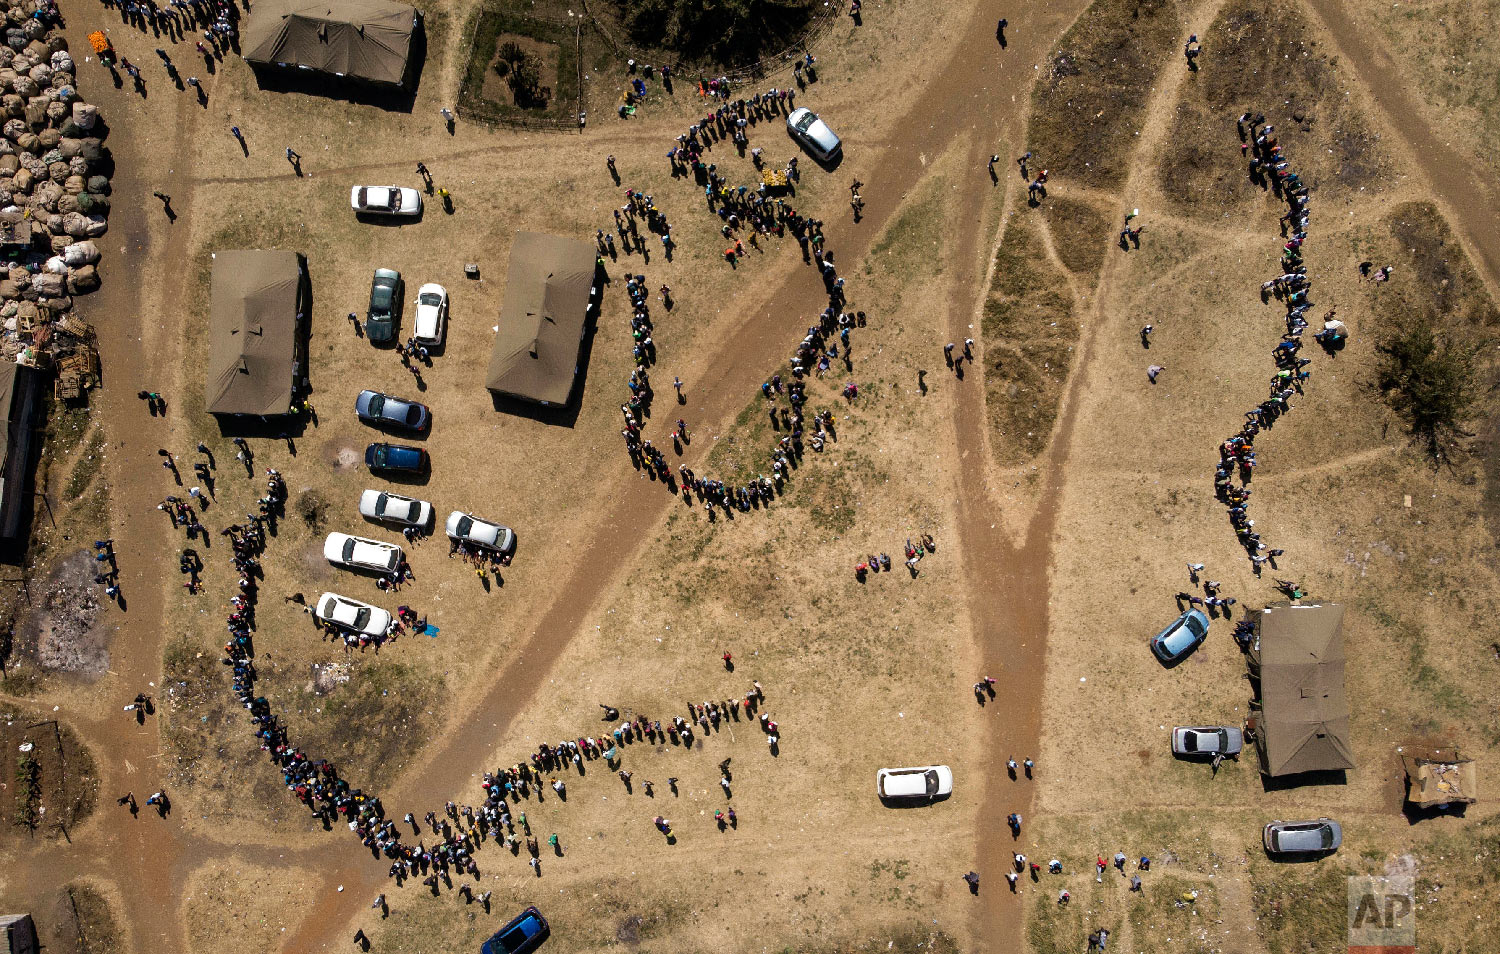  People wait in a queue to cast their vote at a polling station in Harare, Zimbabwe on July 30, 2018. Zimbabweans on Monday voted in their first election without Robert Mugabe on the ballot, a contest that could bring international legitimacy and inv